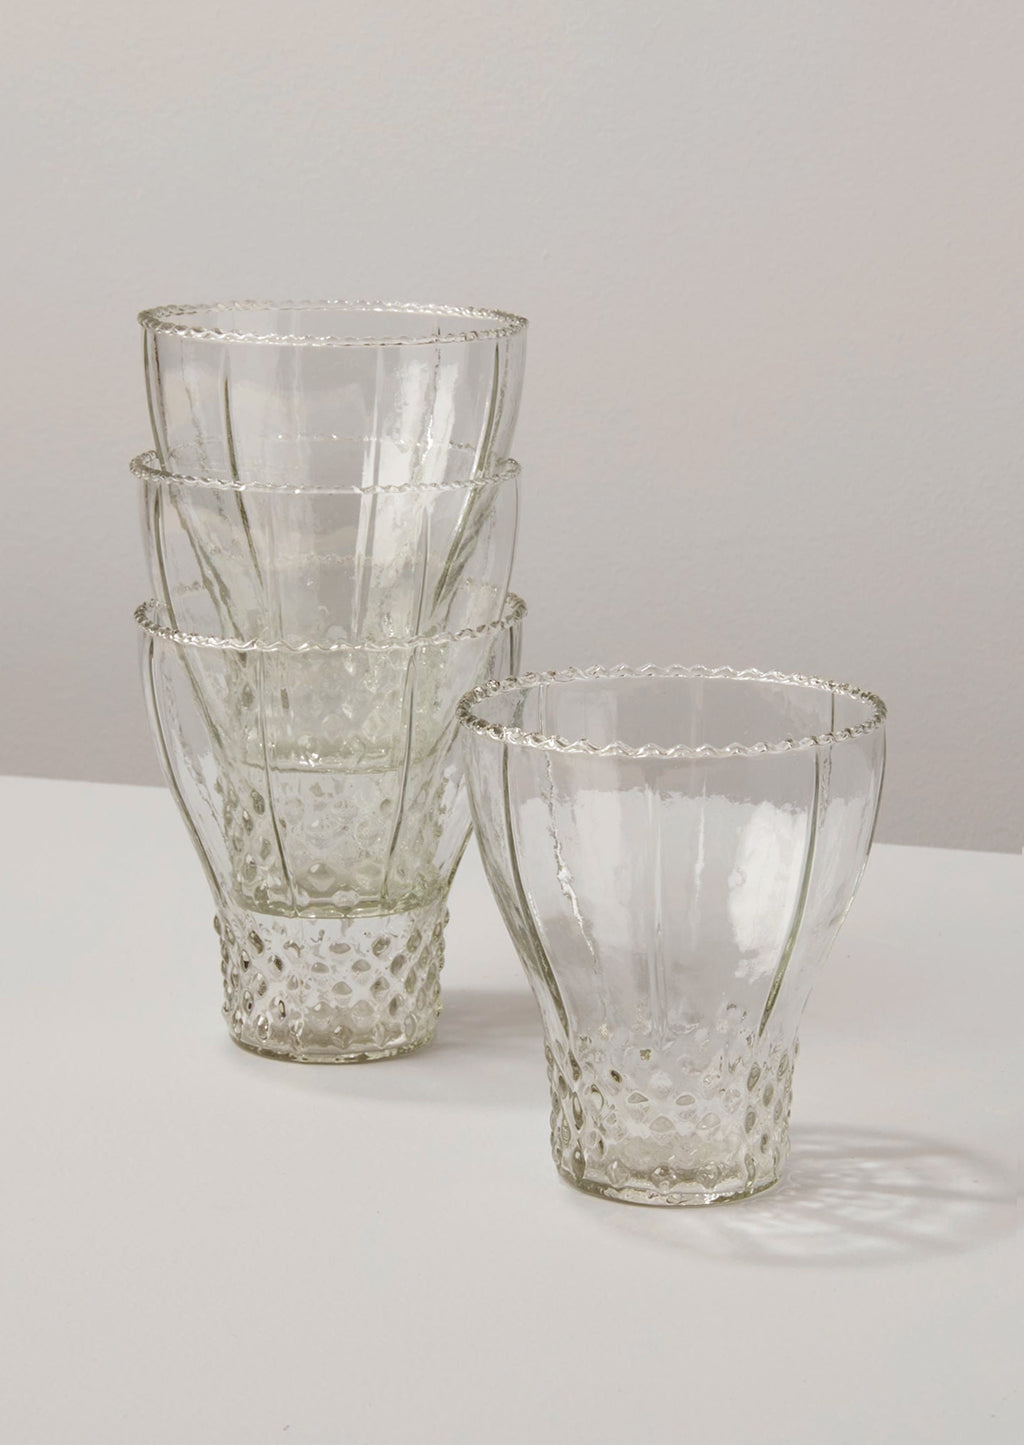 Bell: Glasses in bell shape with hobnail pattern.